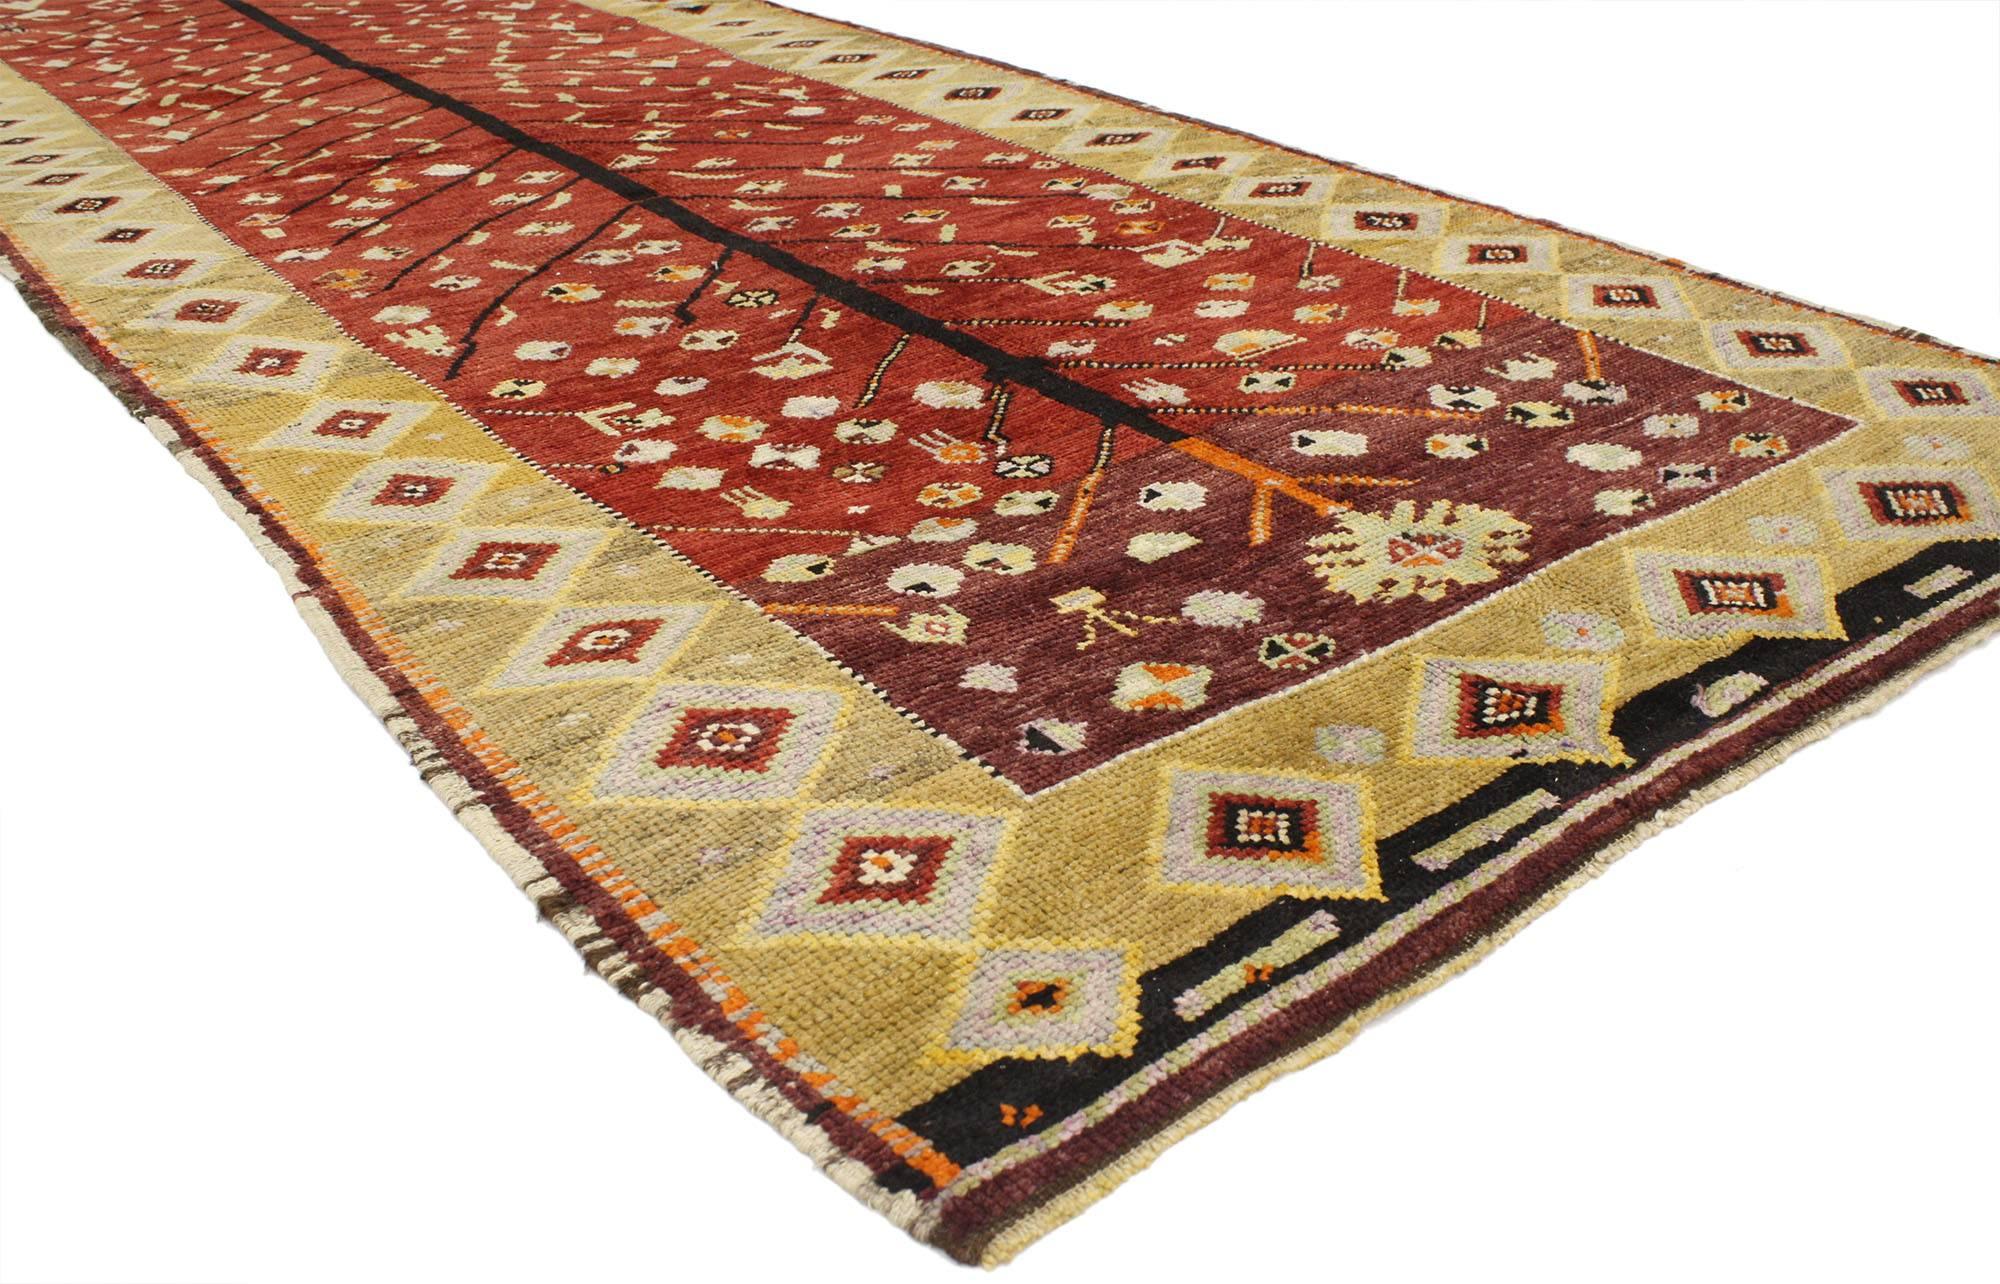 52252, vintage Turkish Oushak runner with Tribal style. This hand-knotted wool vintage Turkish Oushak runner features a tree of life design on an abrashed scarlet red and burgundy field. A variety of symbols and motifs surround the tree including